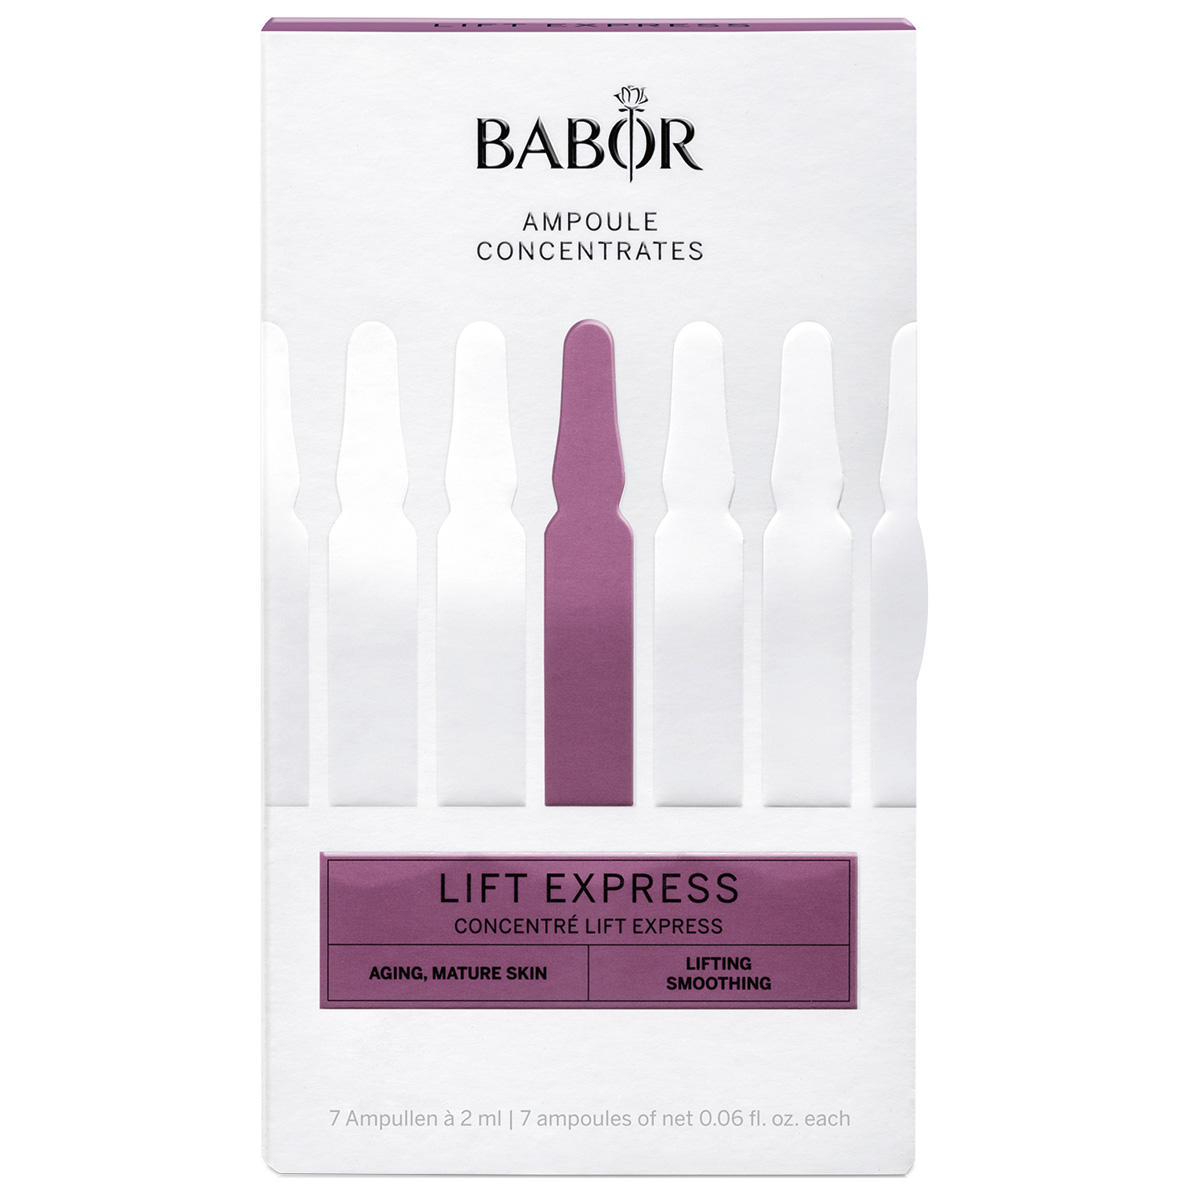 BABOR AMPOULE CONCENTRATES Lift Express 7 x 2 ml - 1